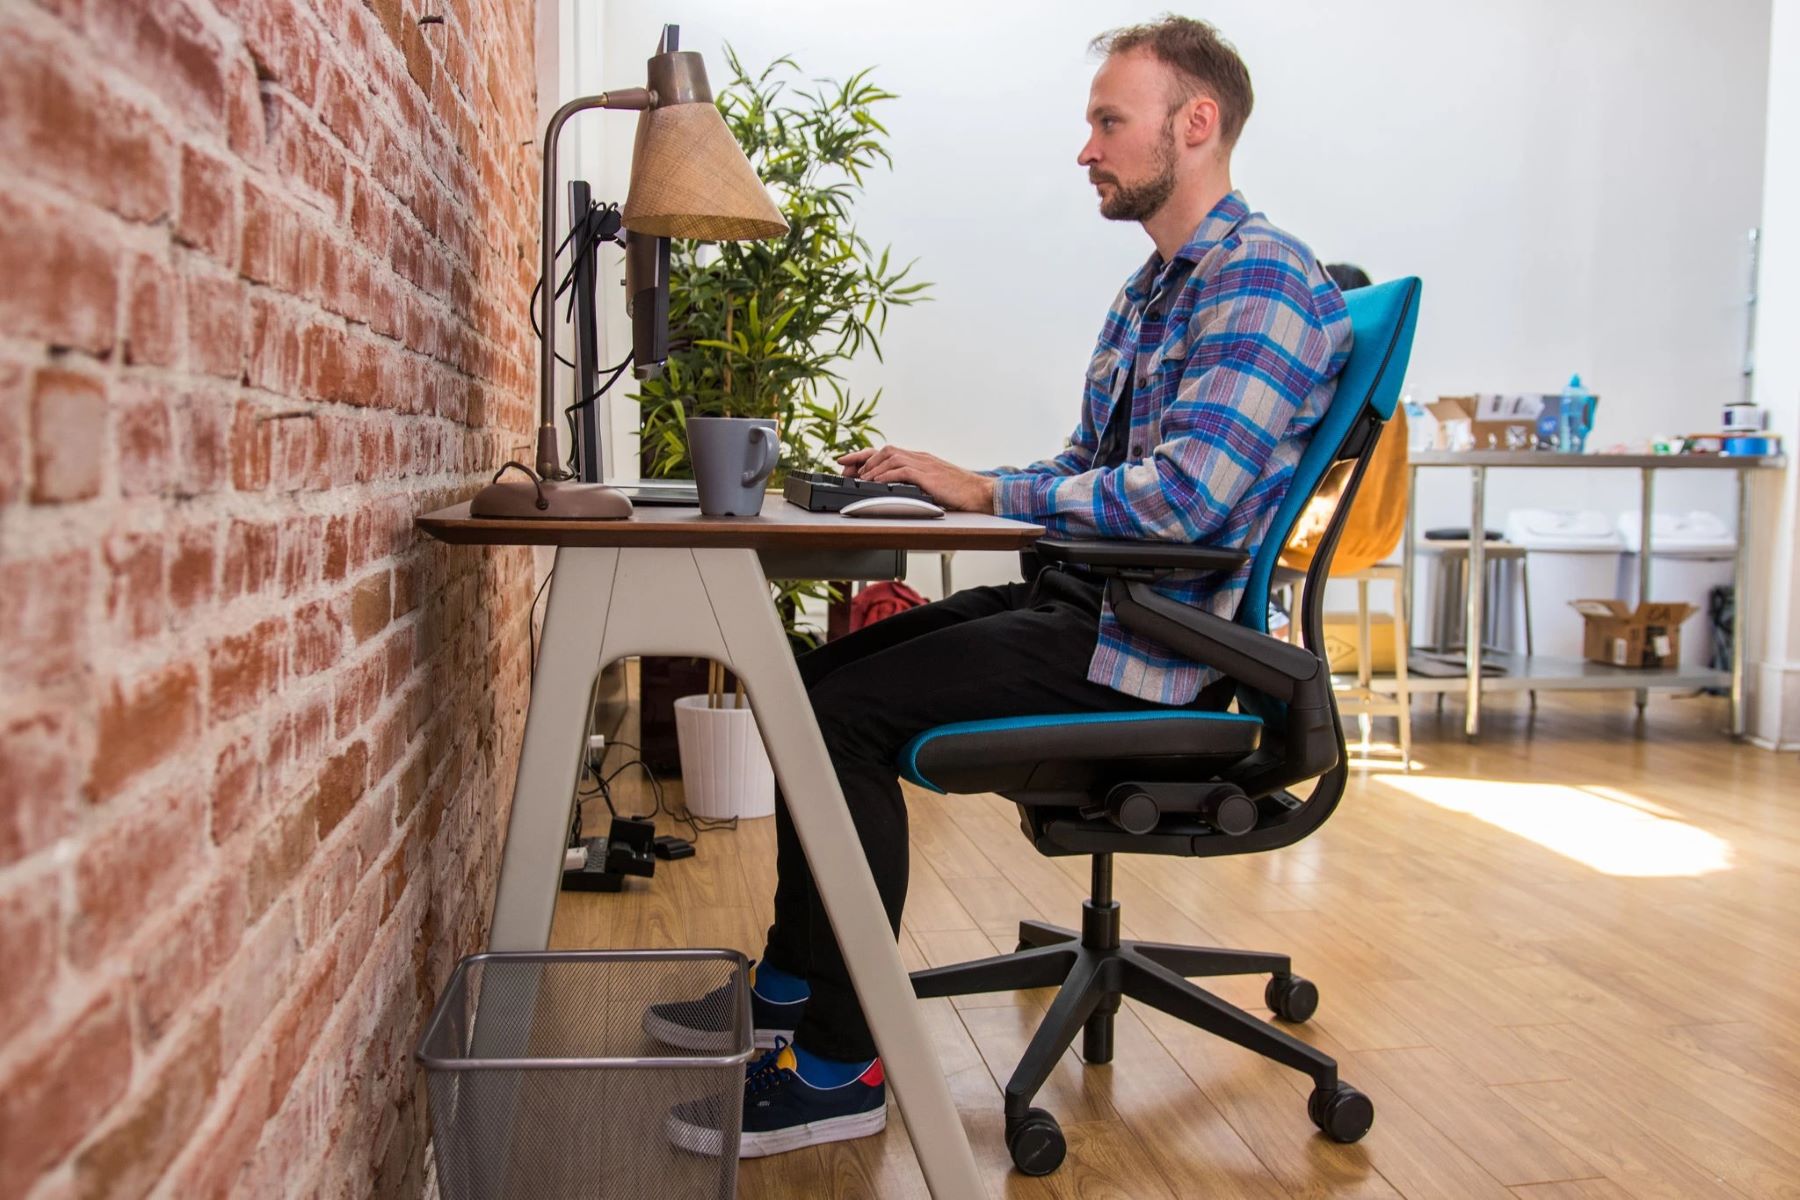 Comfortable and Supportive: Ergonomic Office Chair Review for Him